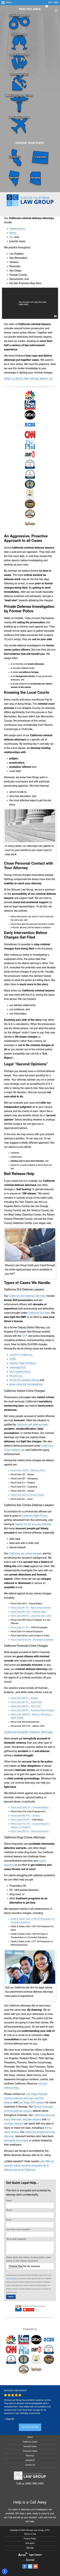 Shouse Law Group - West Convina CA Lawyers